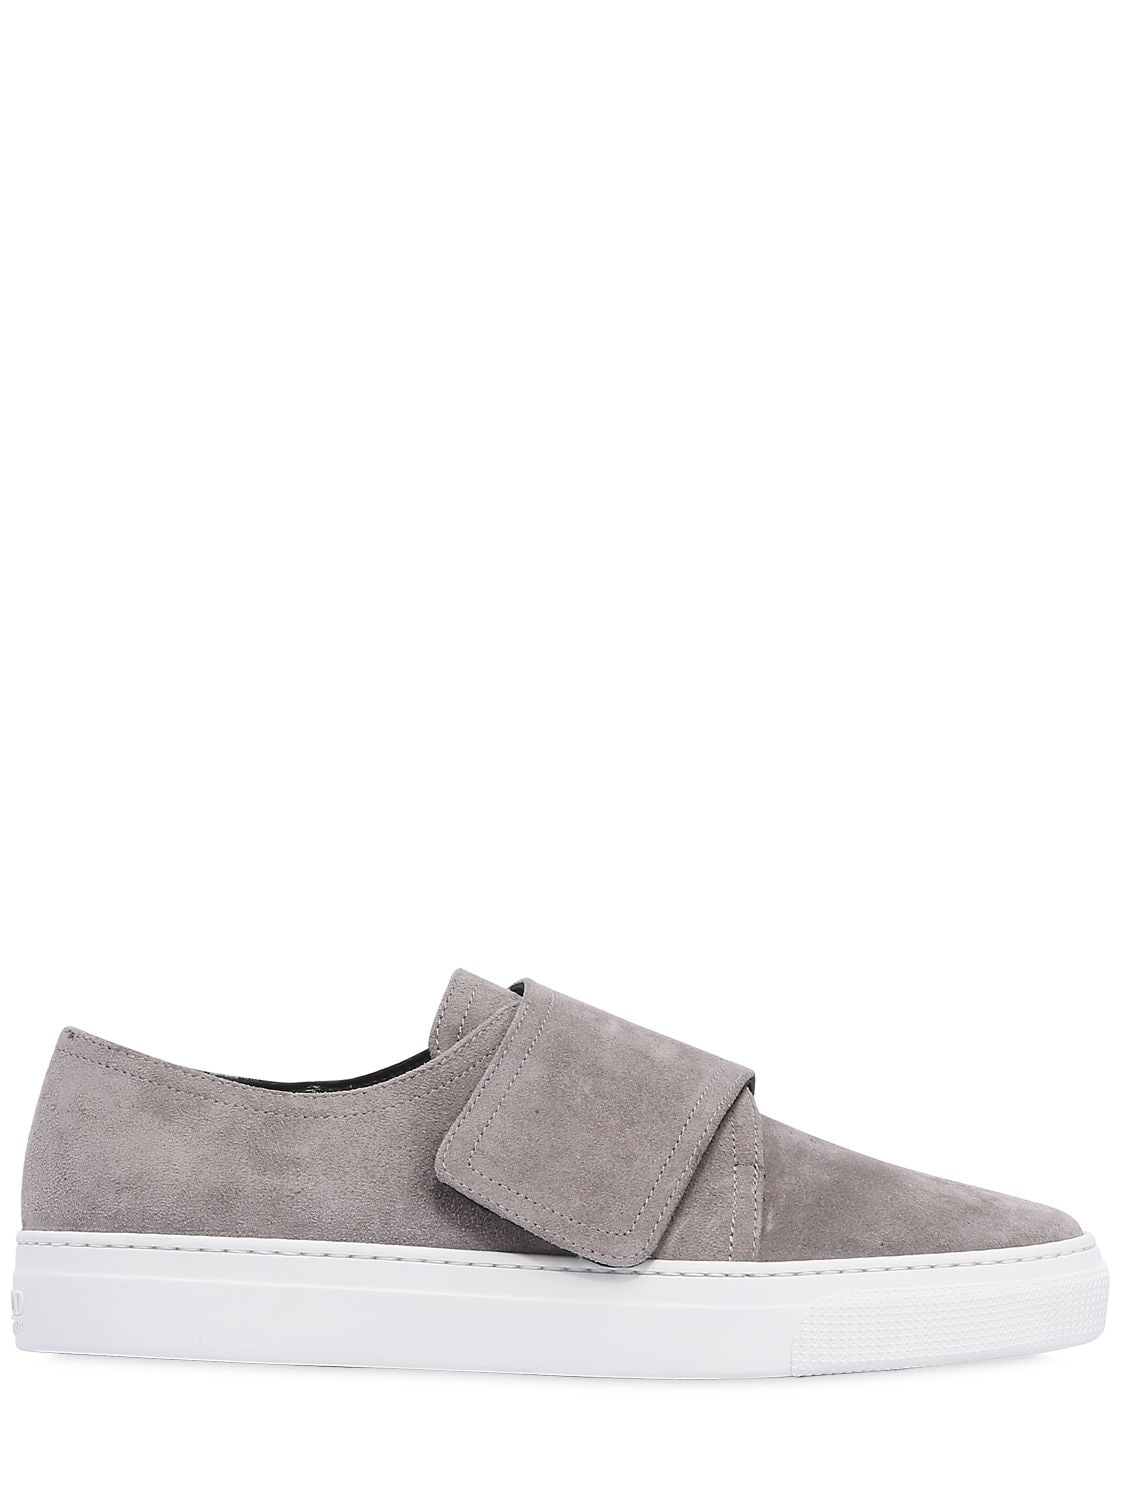 Zcd Montreal 20mm Senna Suede Sneakers In Grey